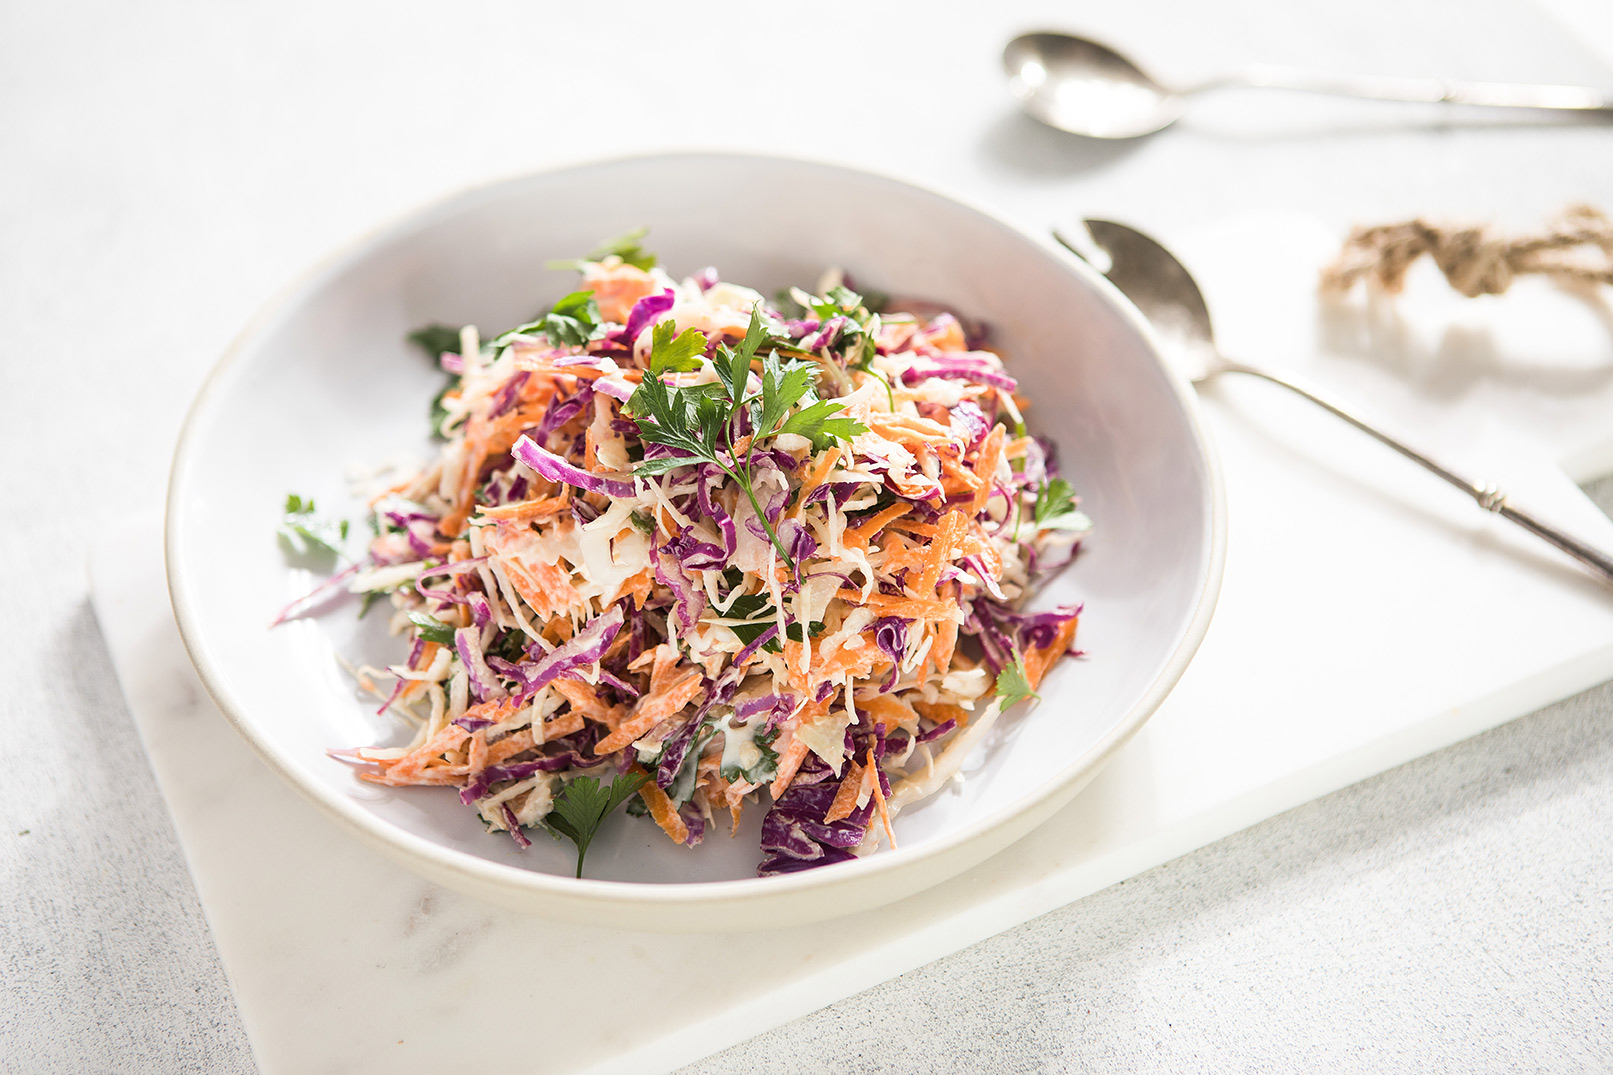 Image of coleslaw in a white bowl served on a white marble cutting board with serving utensils in the background